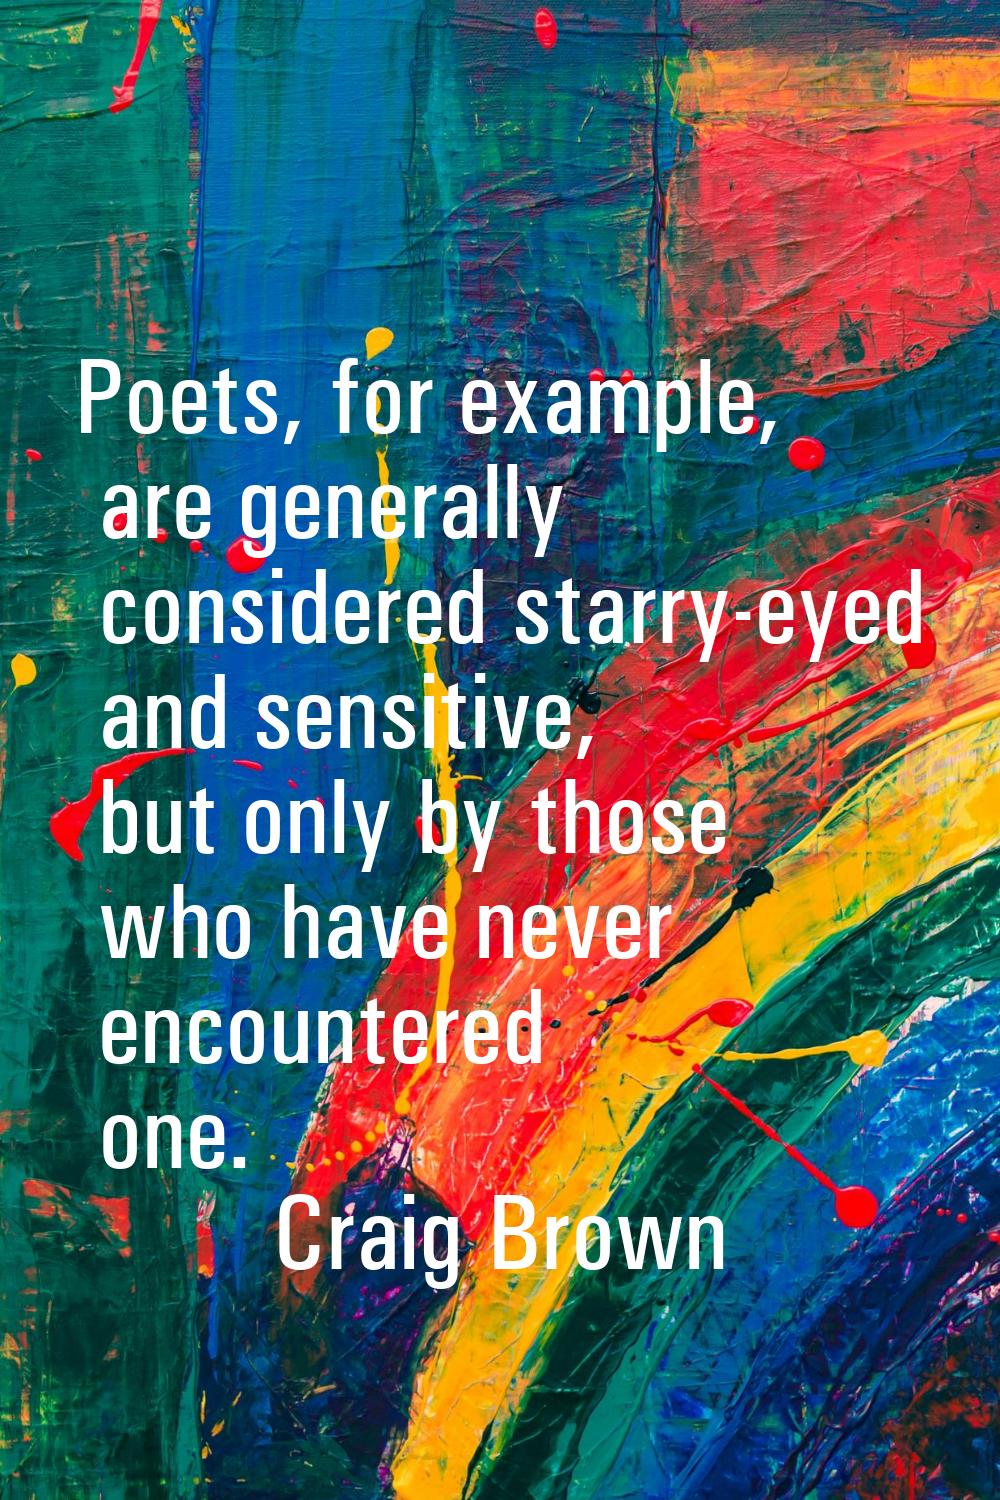 Poets, for example, are generally considered starry-eyed and sensitive, but only by those who have 